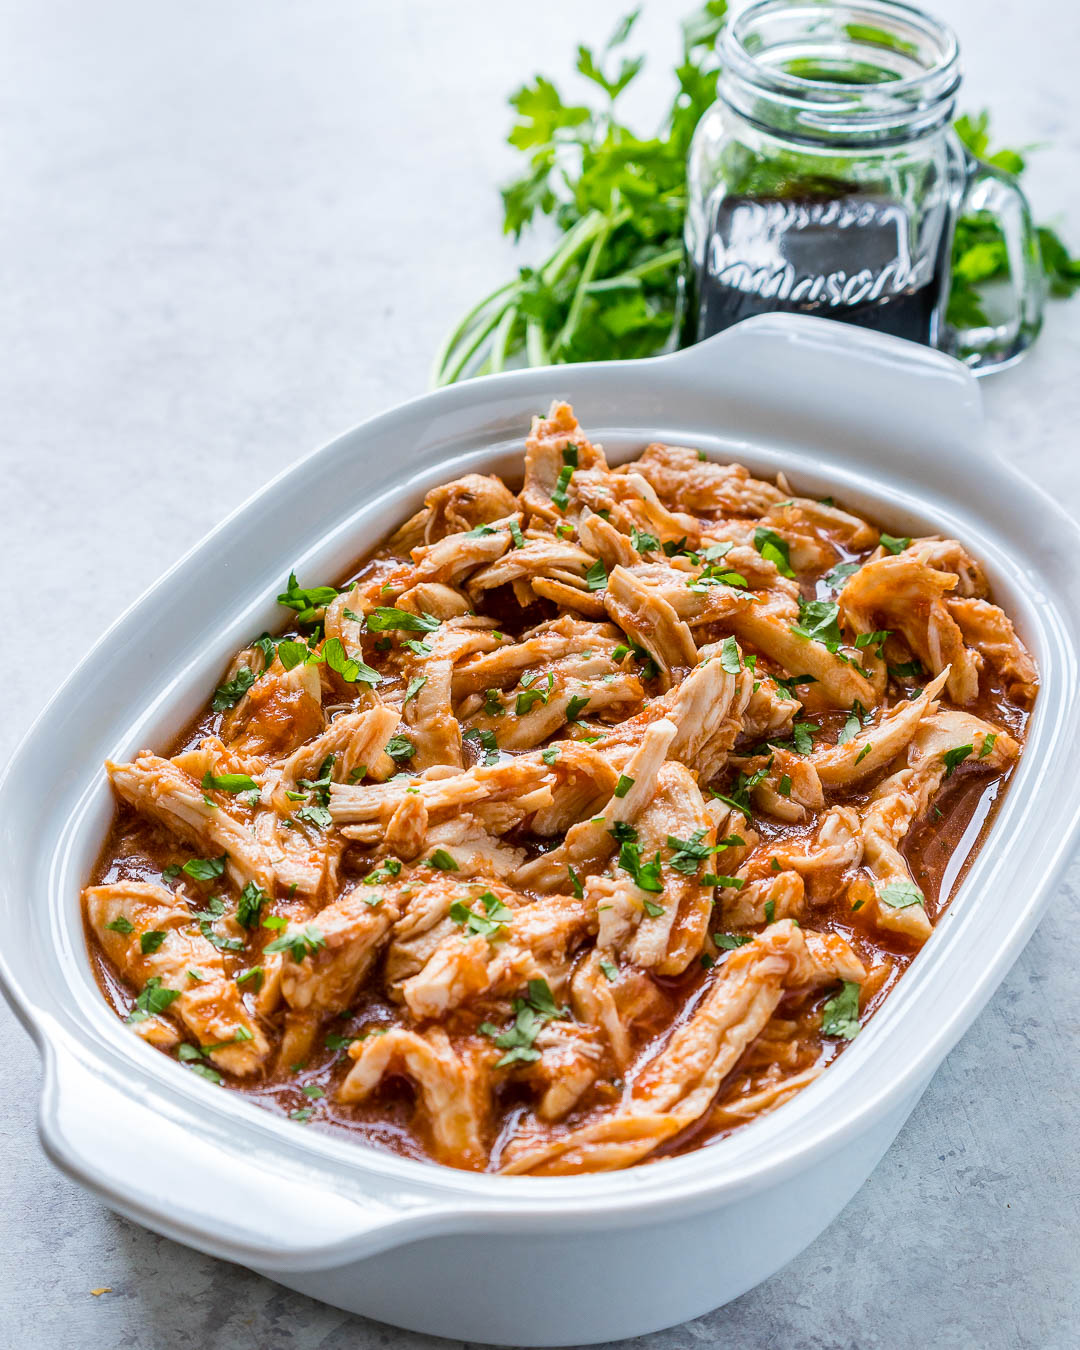 Crockpot Pulled Chicken by CleanFoodCrush